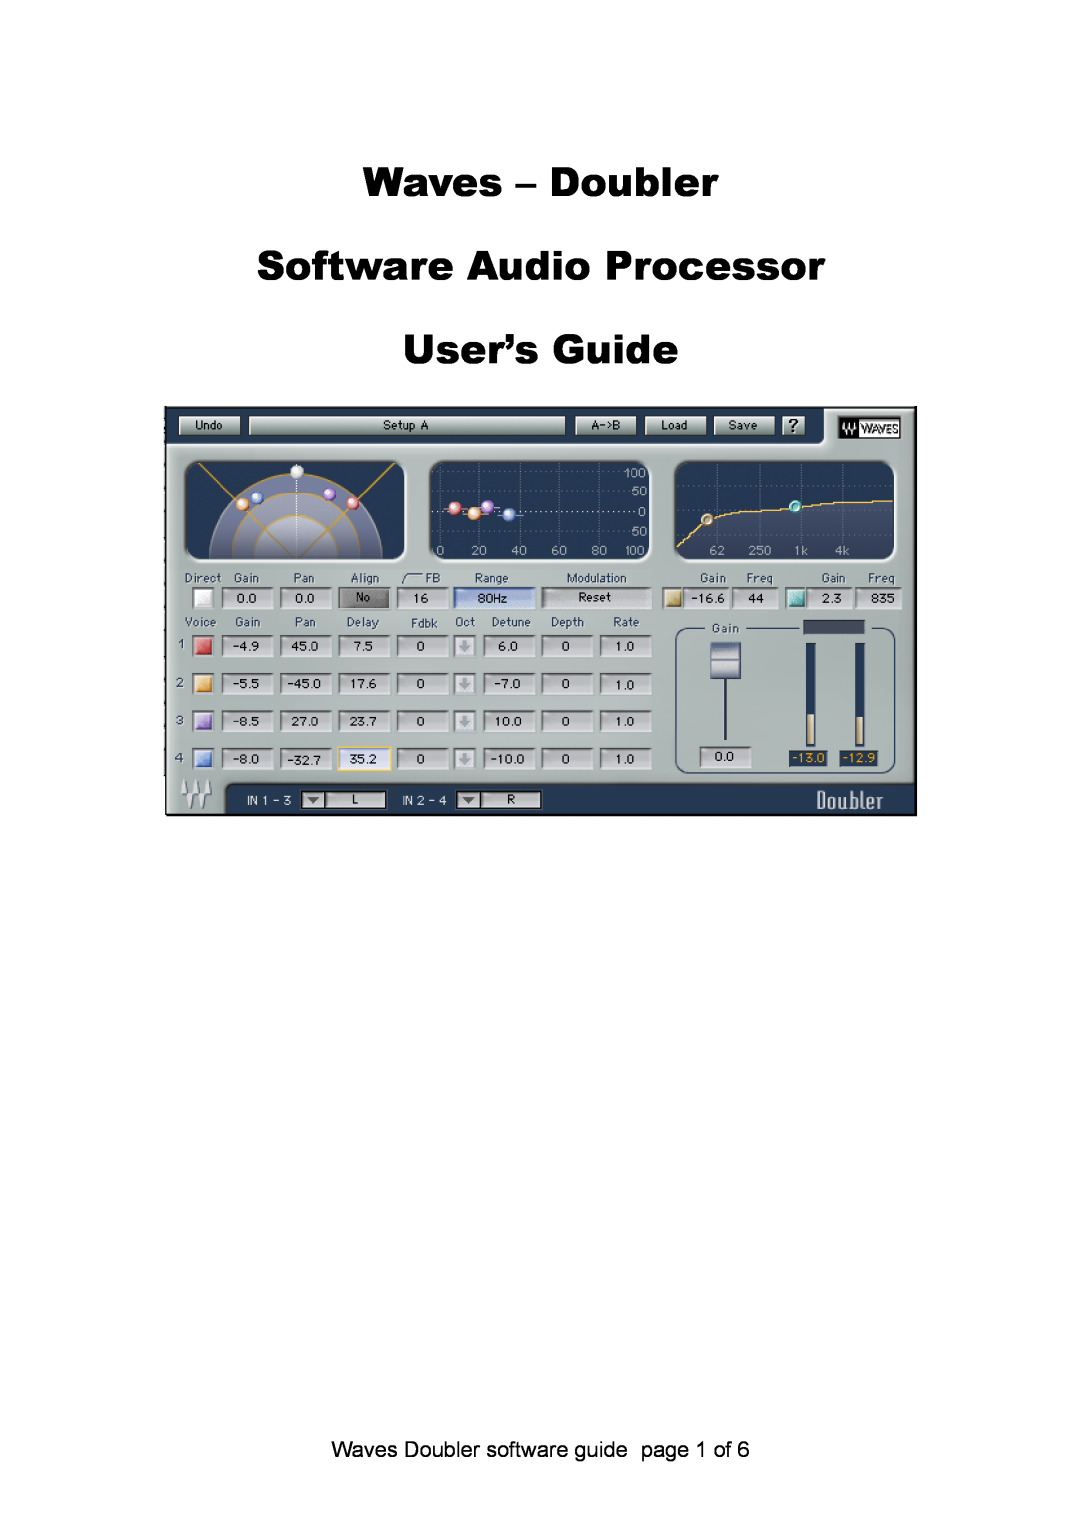 Waves manual Waves - Doubler Software Audio Processor, User’s Guide, Waves Doubler software guide 